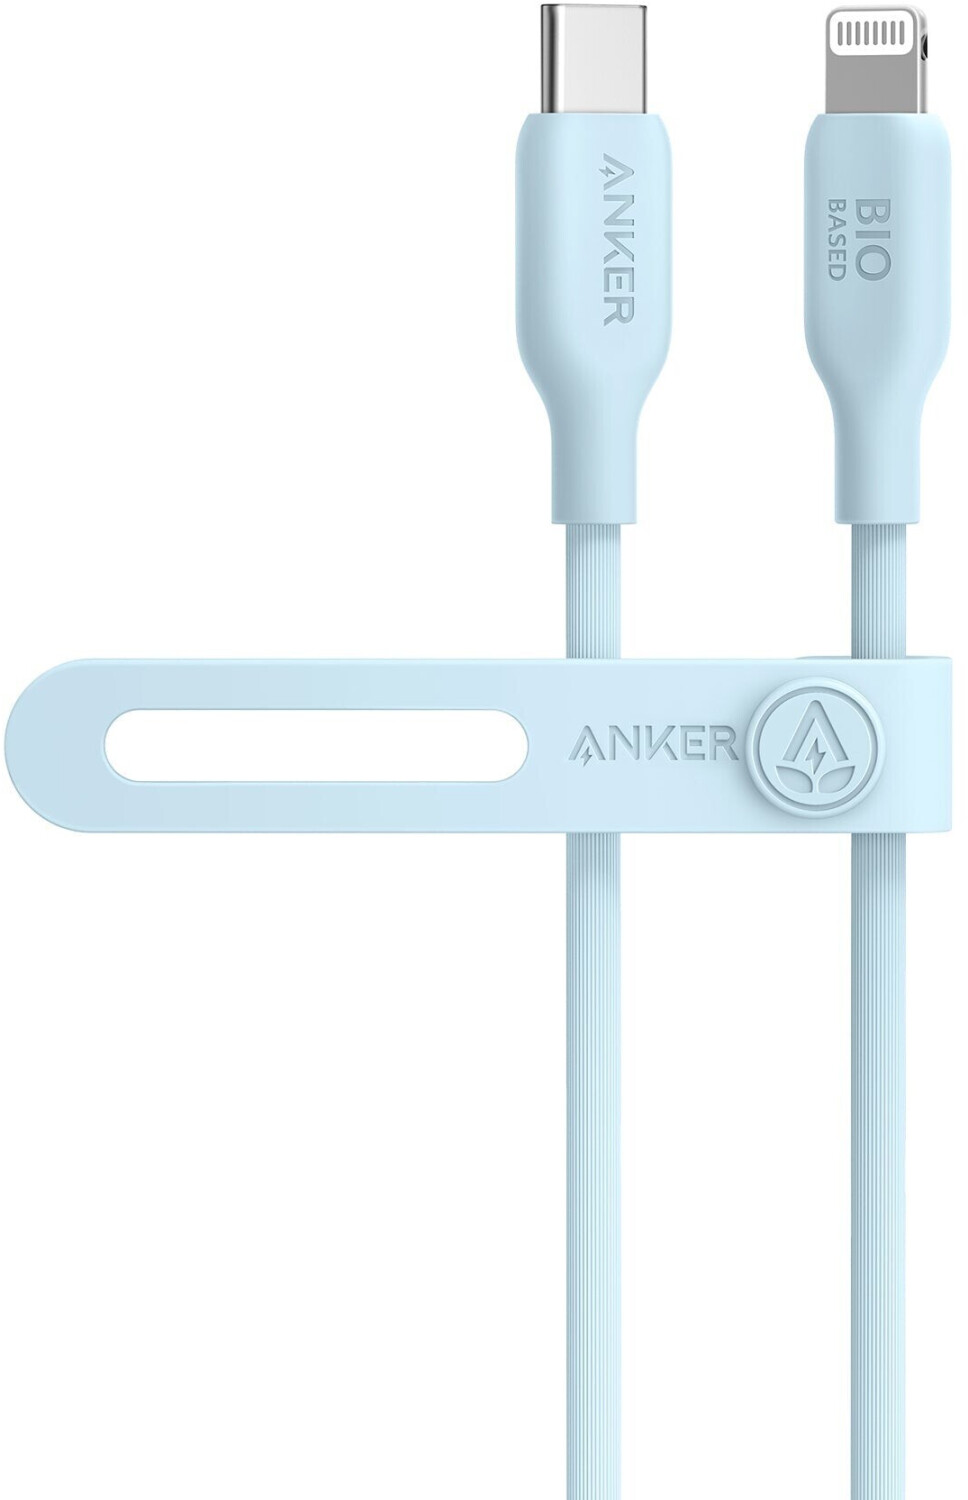 Photos - Cable (video, audio, USB) ANKER Tech  541 USB-C to Lightning Cable 0,91m Misty Blue 